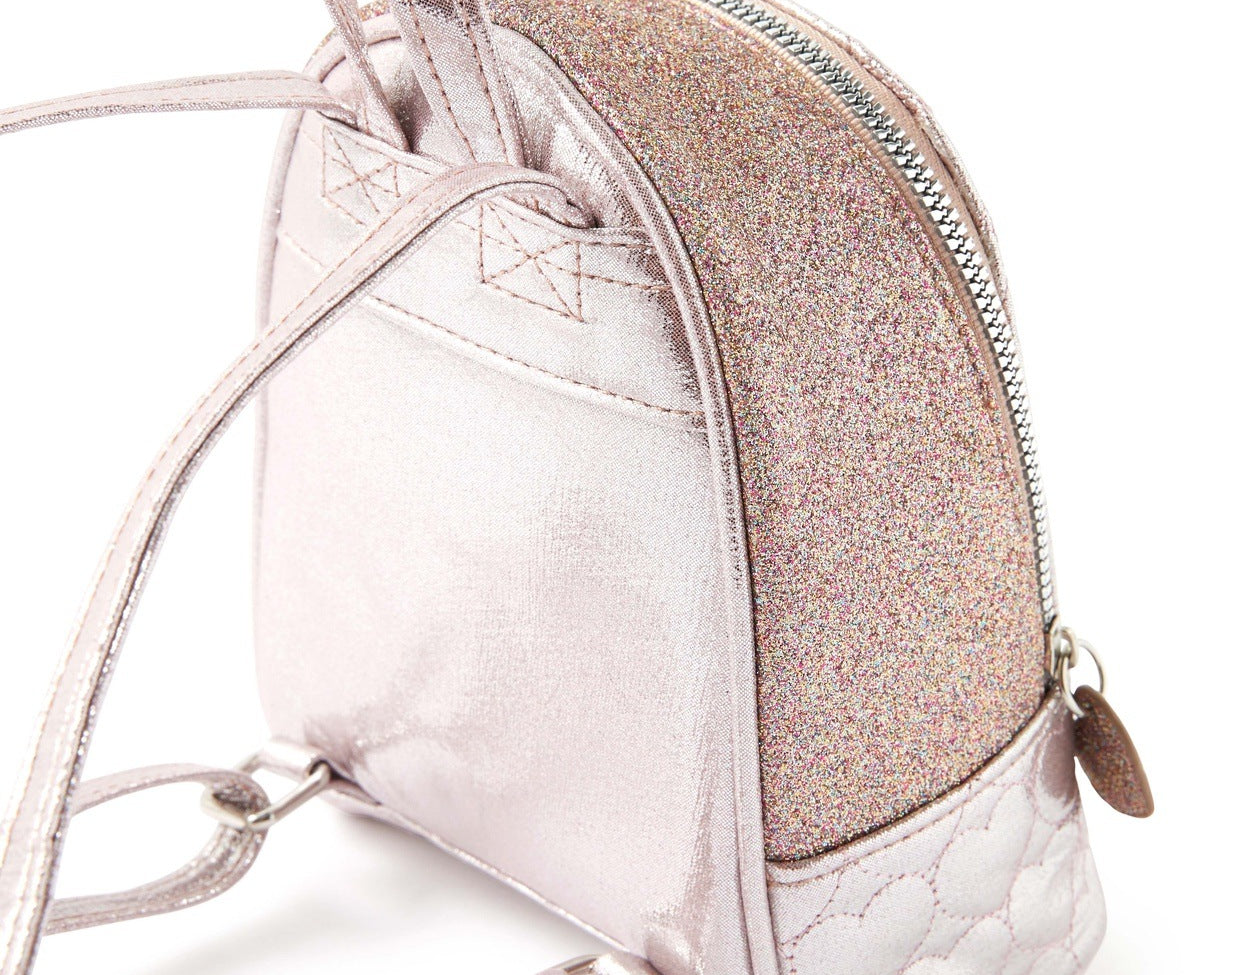 Accessorize London Mini Heart Quilted Backpack